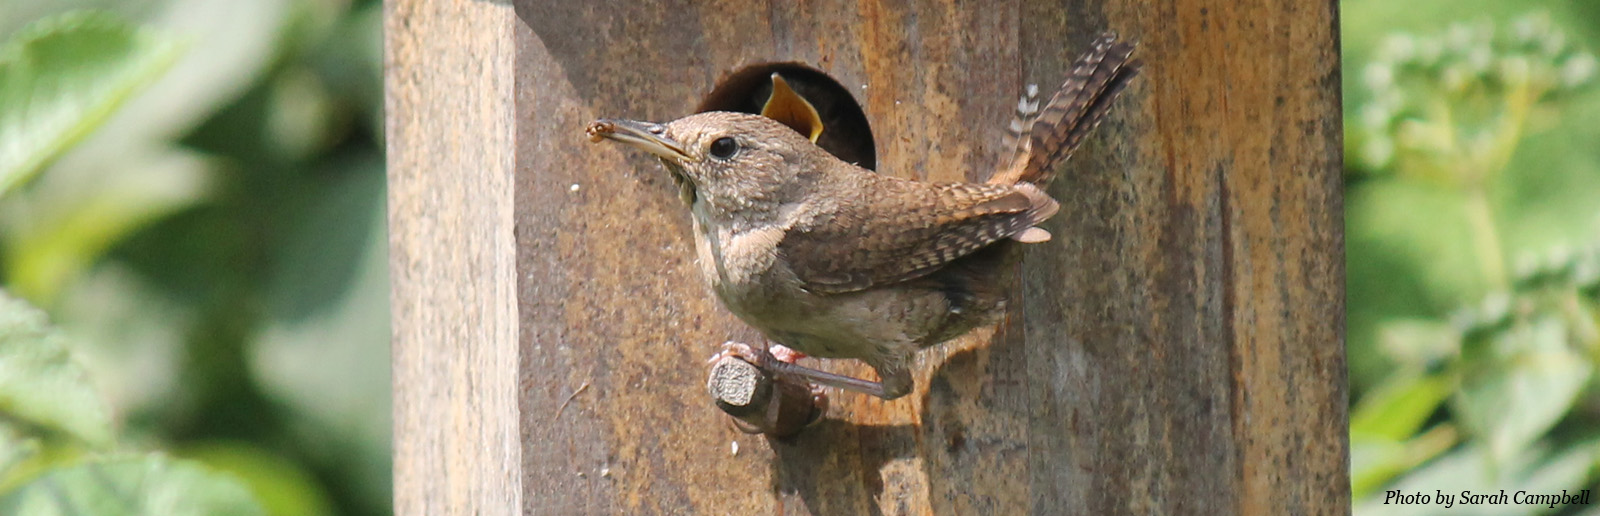 Wren eating insects from Garden